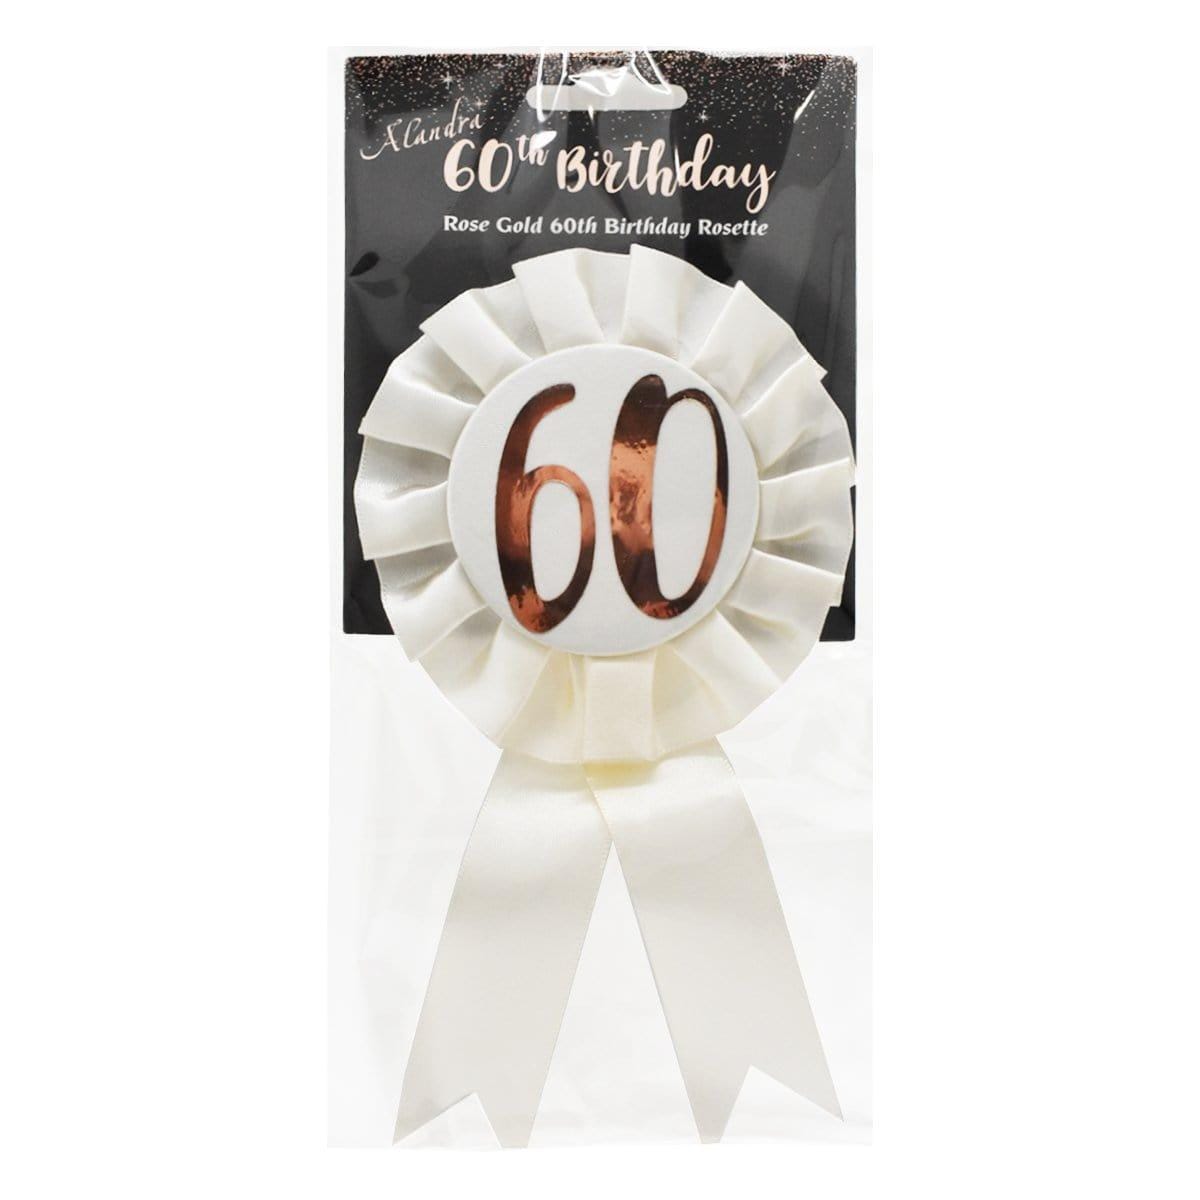 Buy Age Specific Birthday Rosette Badge Rose Gold - 60th sold at Party Expert